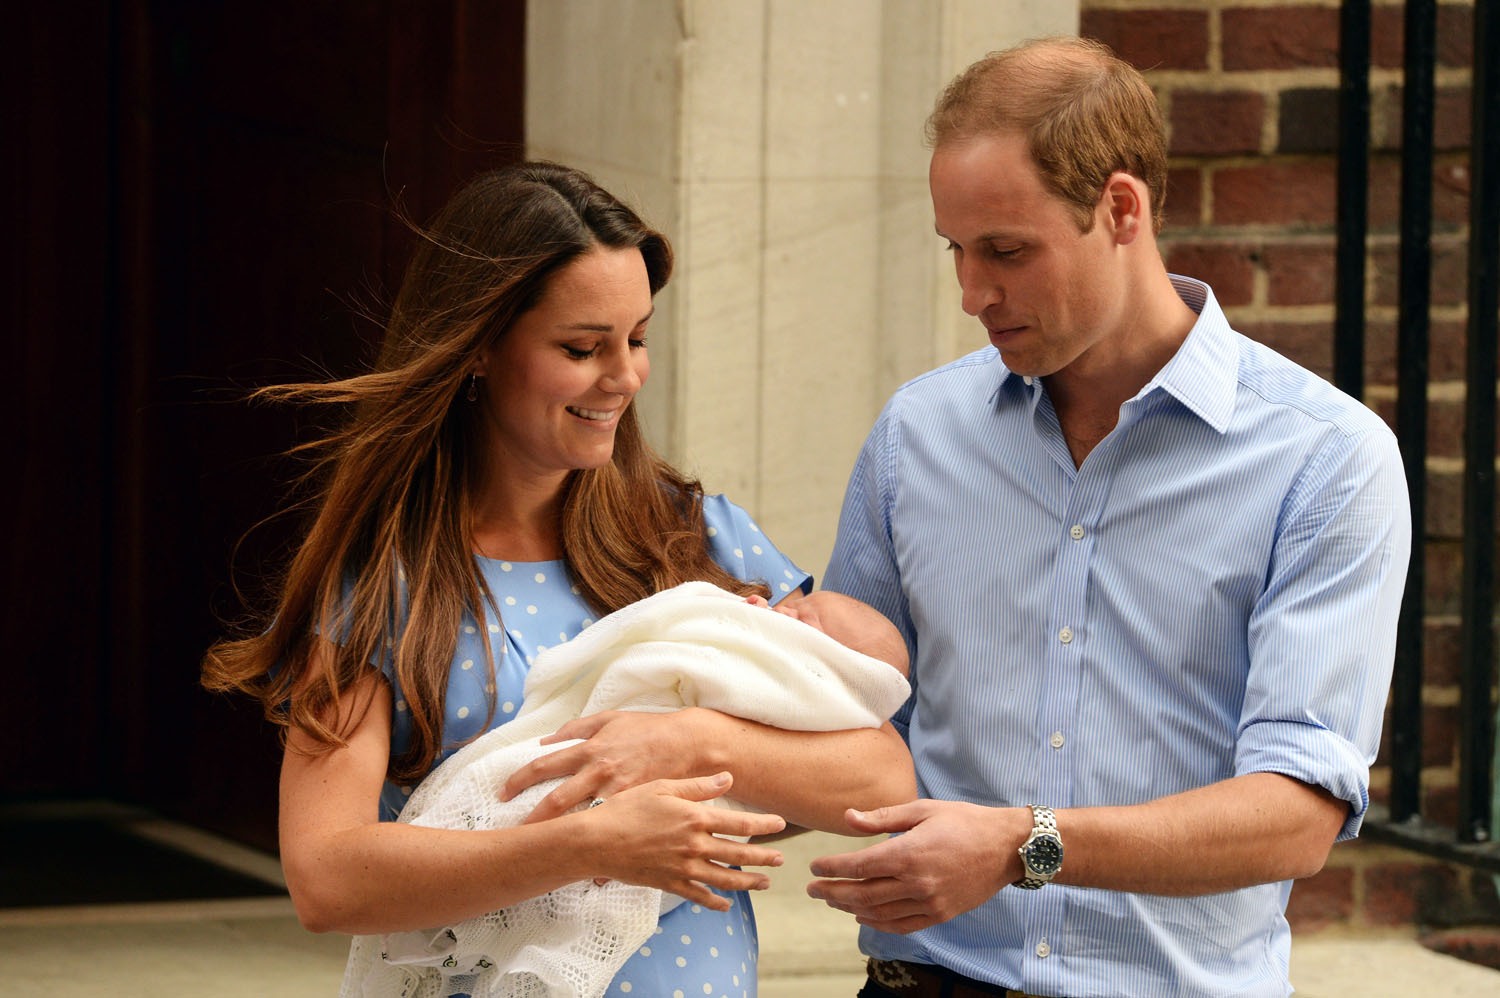 Prince William, Duke of Cambridge and Catherine, Duchess of Cambridge, depart The Lindo Wing with their newborn son, Prince George, at St Mary's Hospital in London on July 23, 2013.